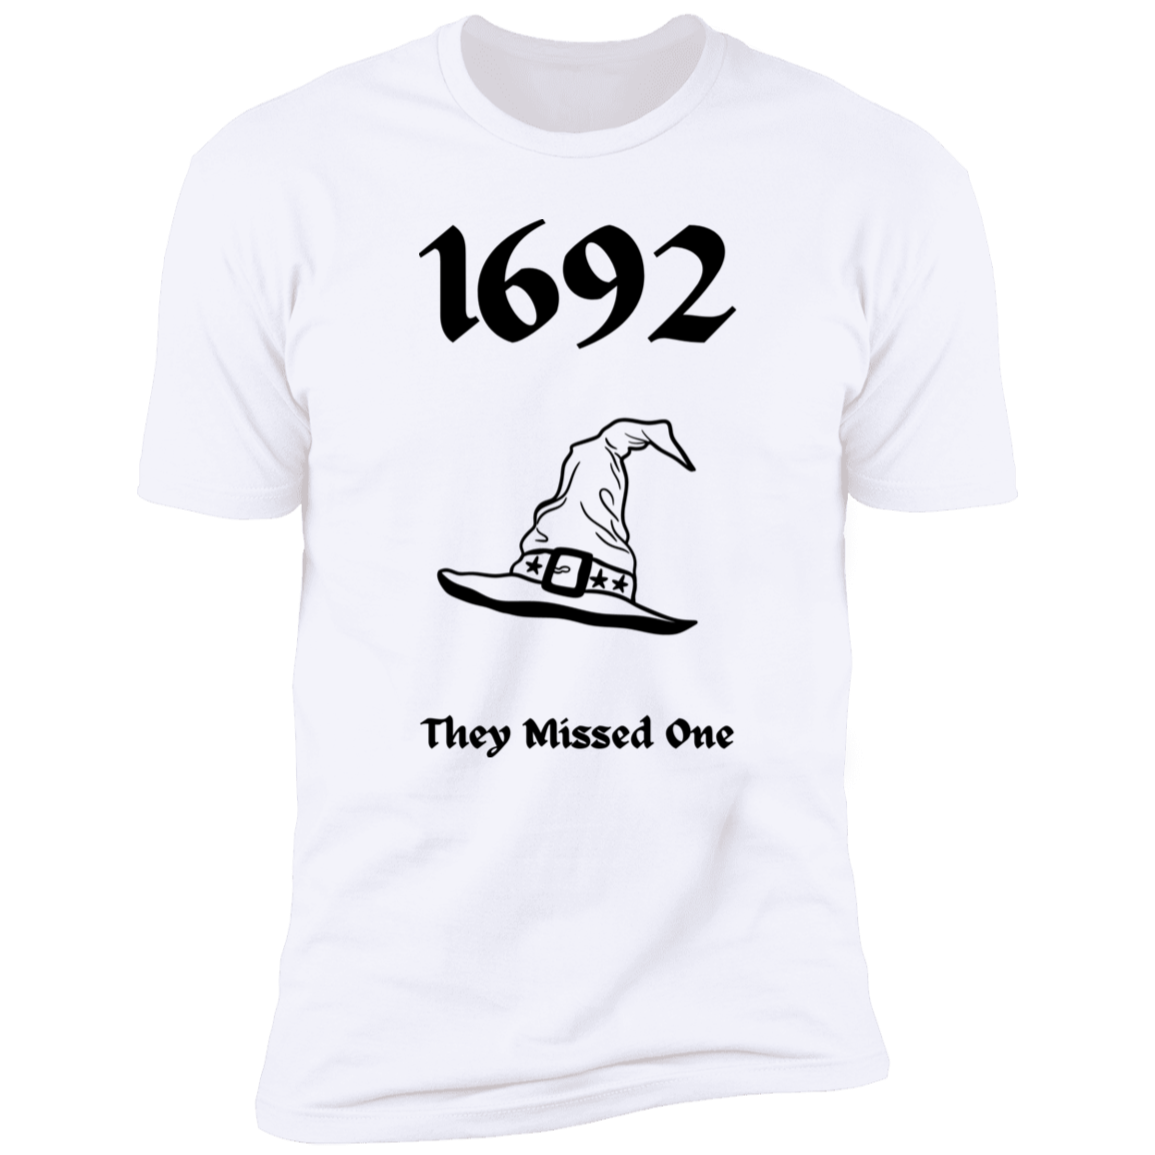 Get trendy with 1692  They Missed One Premium Short Sleeve Tee (Closeout) - T-Shirts available at Good Gift Company. Grab yours for $17.95 today!